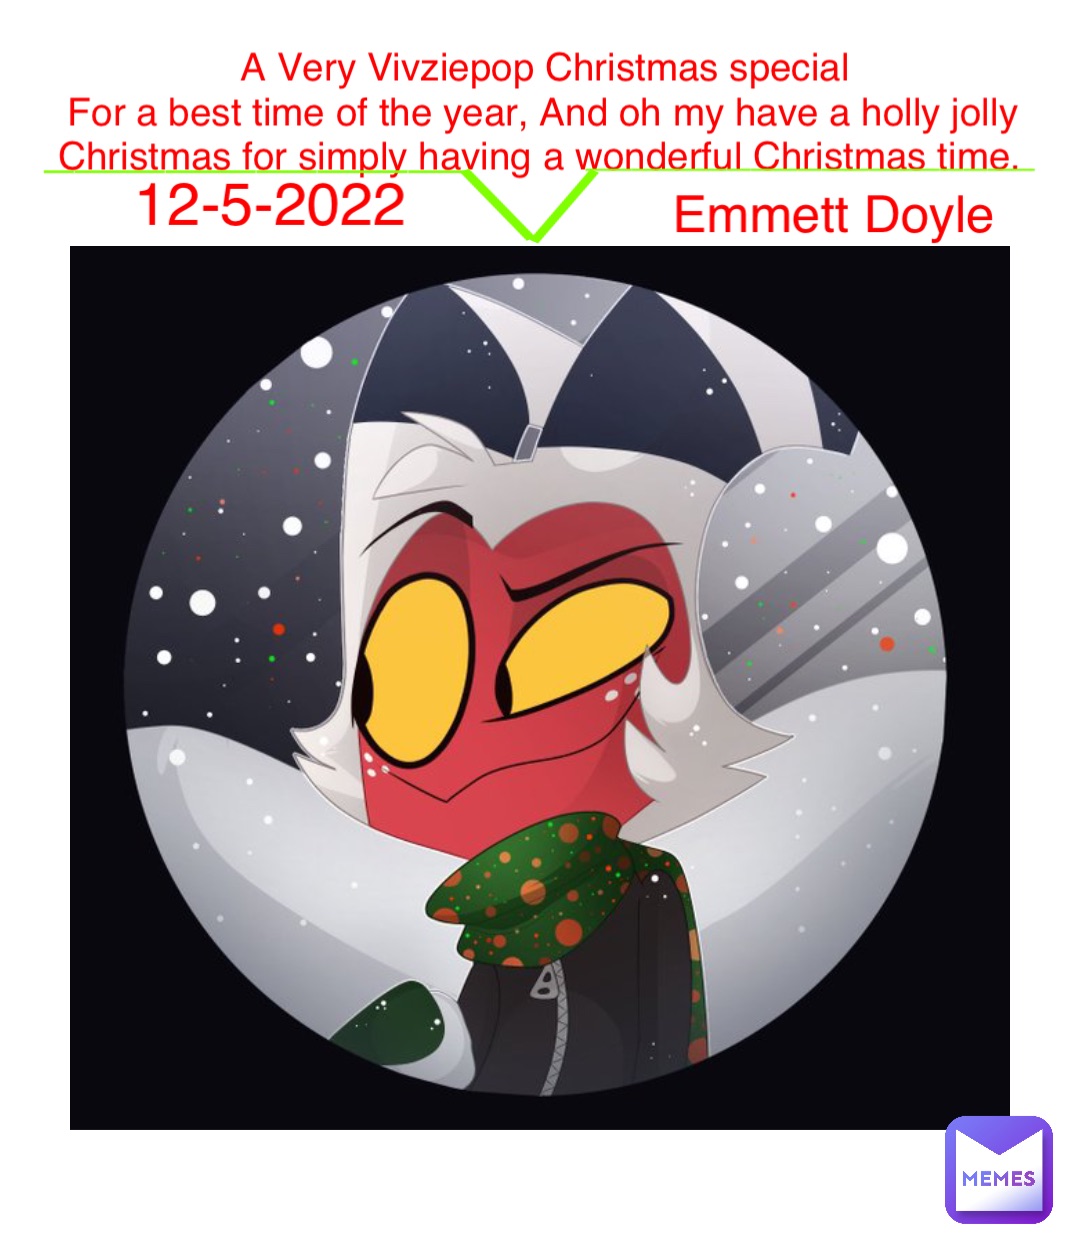 A Very Vivziepop Christmas special 
For a best time of the year, And oh my have a holly jolly Christmas for simply having a wonderful Christmas time. Emmett Doyle 12-5-2022 ______________ \ / ___________________